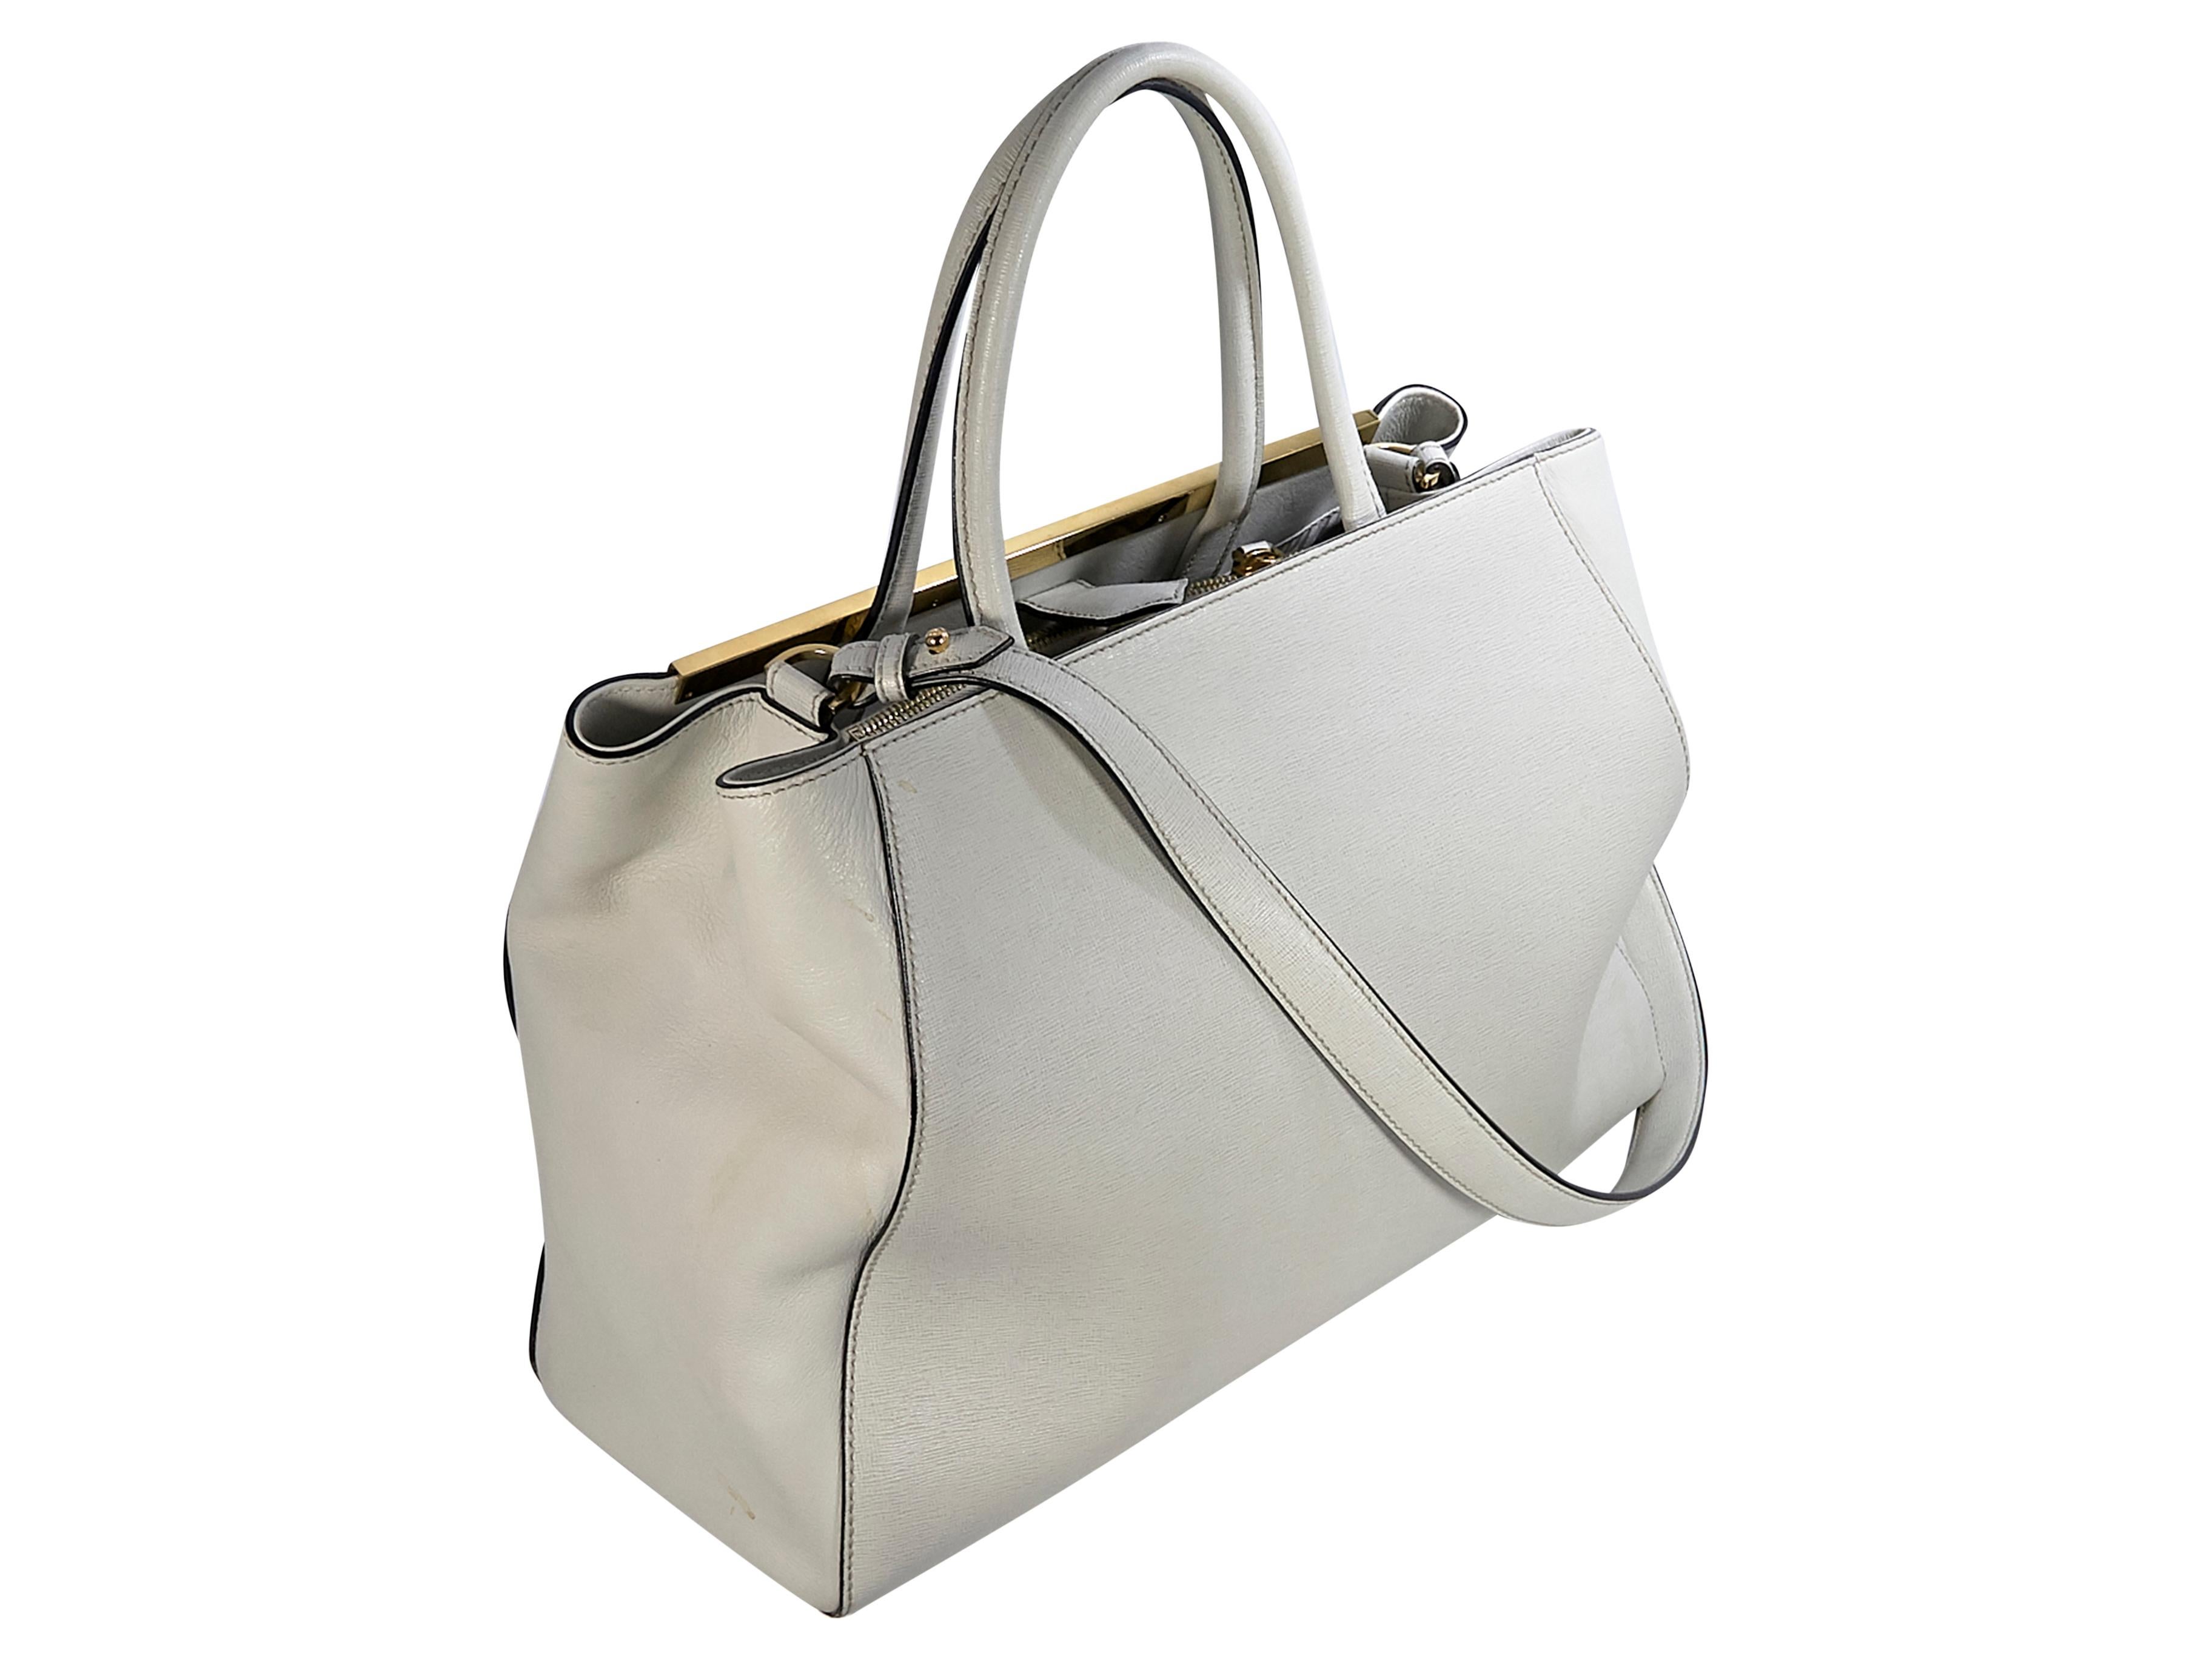 Product details:  Light beige leather 2Jours tote bag by Fendi. Dual carry handles. Detachable crossbody strap. Strap detail over top magnetic closure. Lined interior with inner zip and slide pockets. Protective metal feet. Gold-tone hardware. The